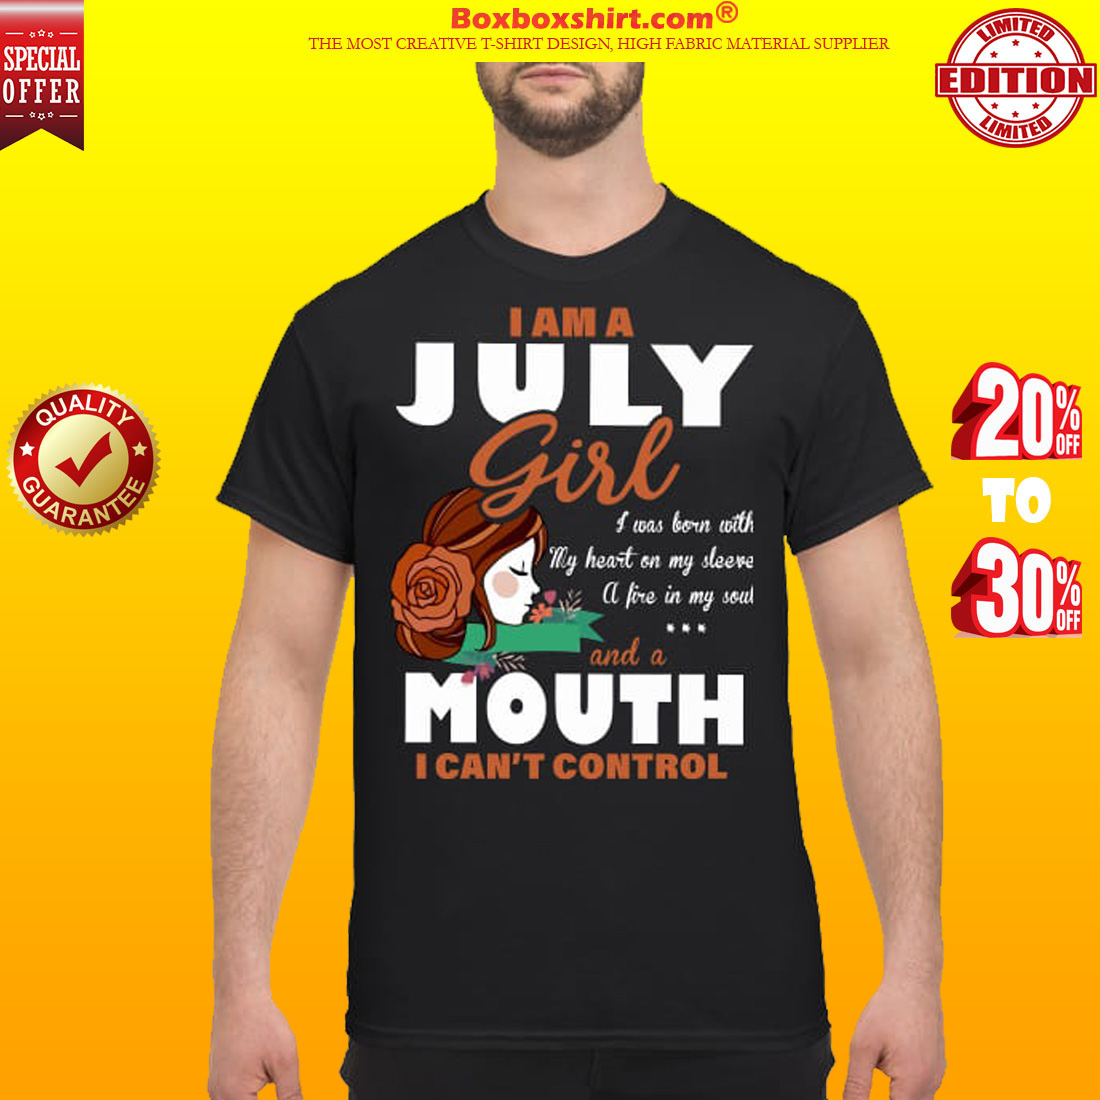 I am a July girl I was born with my heart on my sleeve a fire in my soul and a mouth I can't control classic shirt